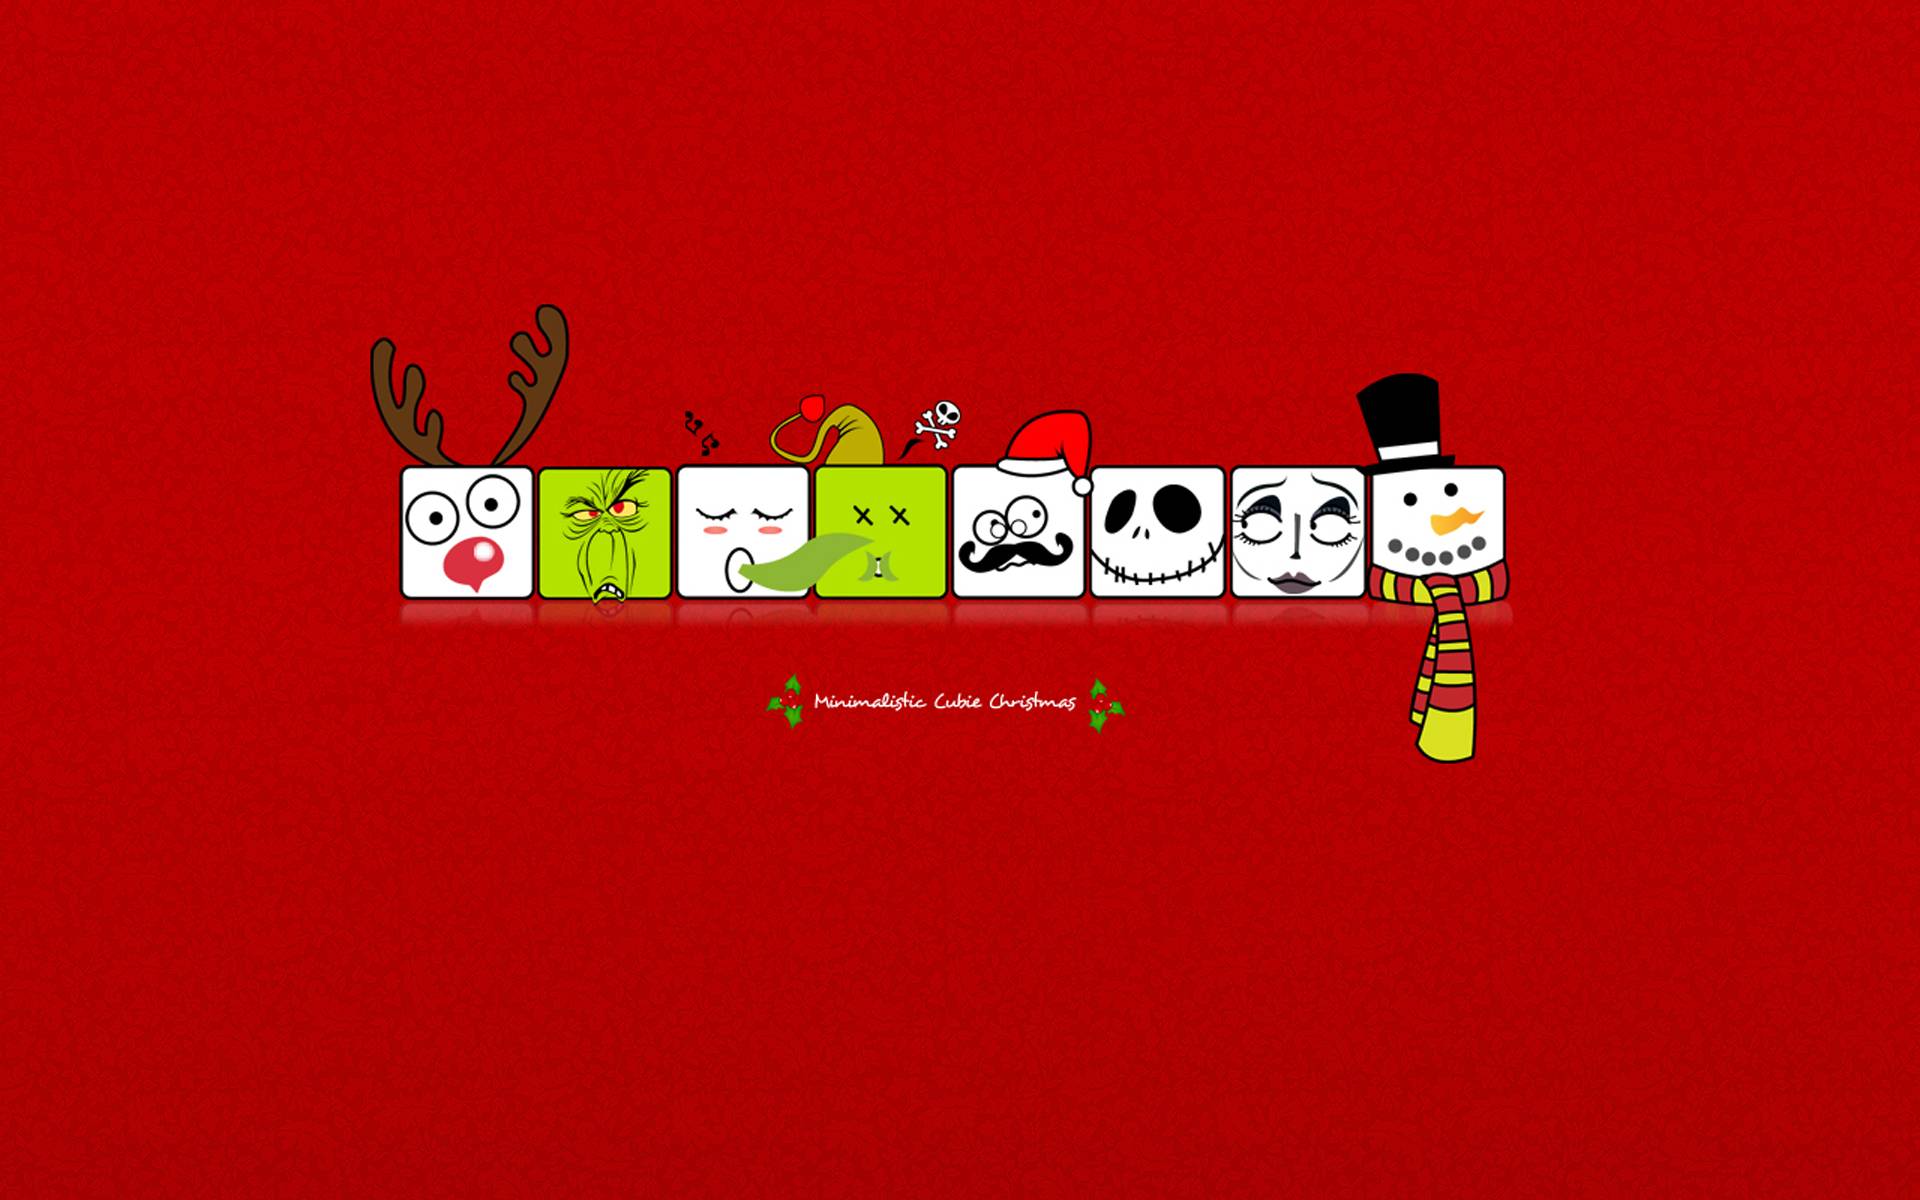 Cute Grinch Wallpapers